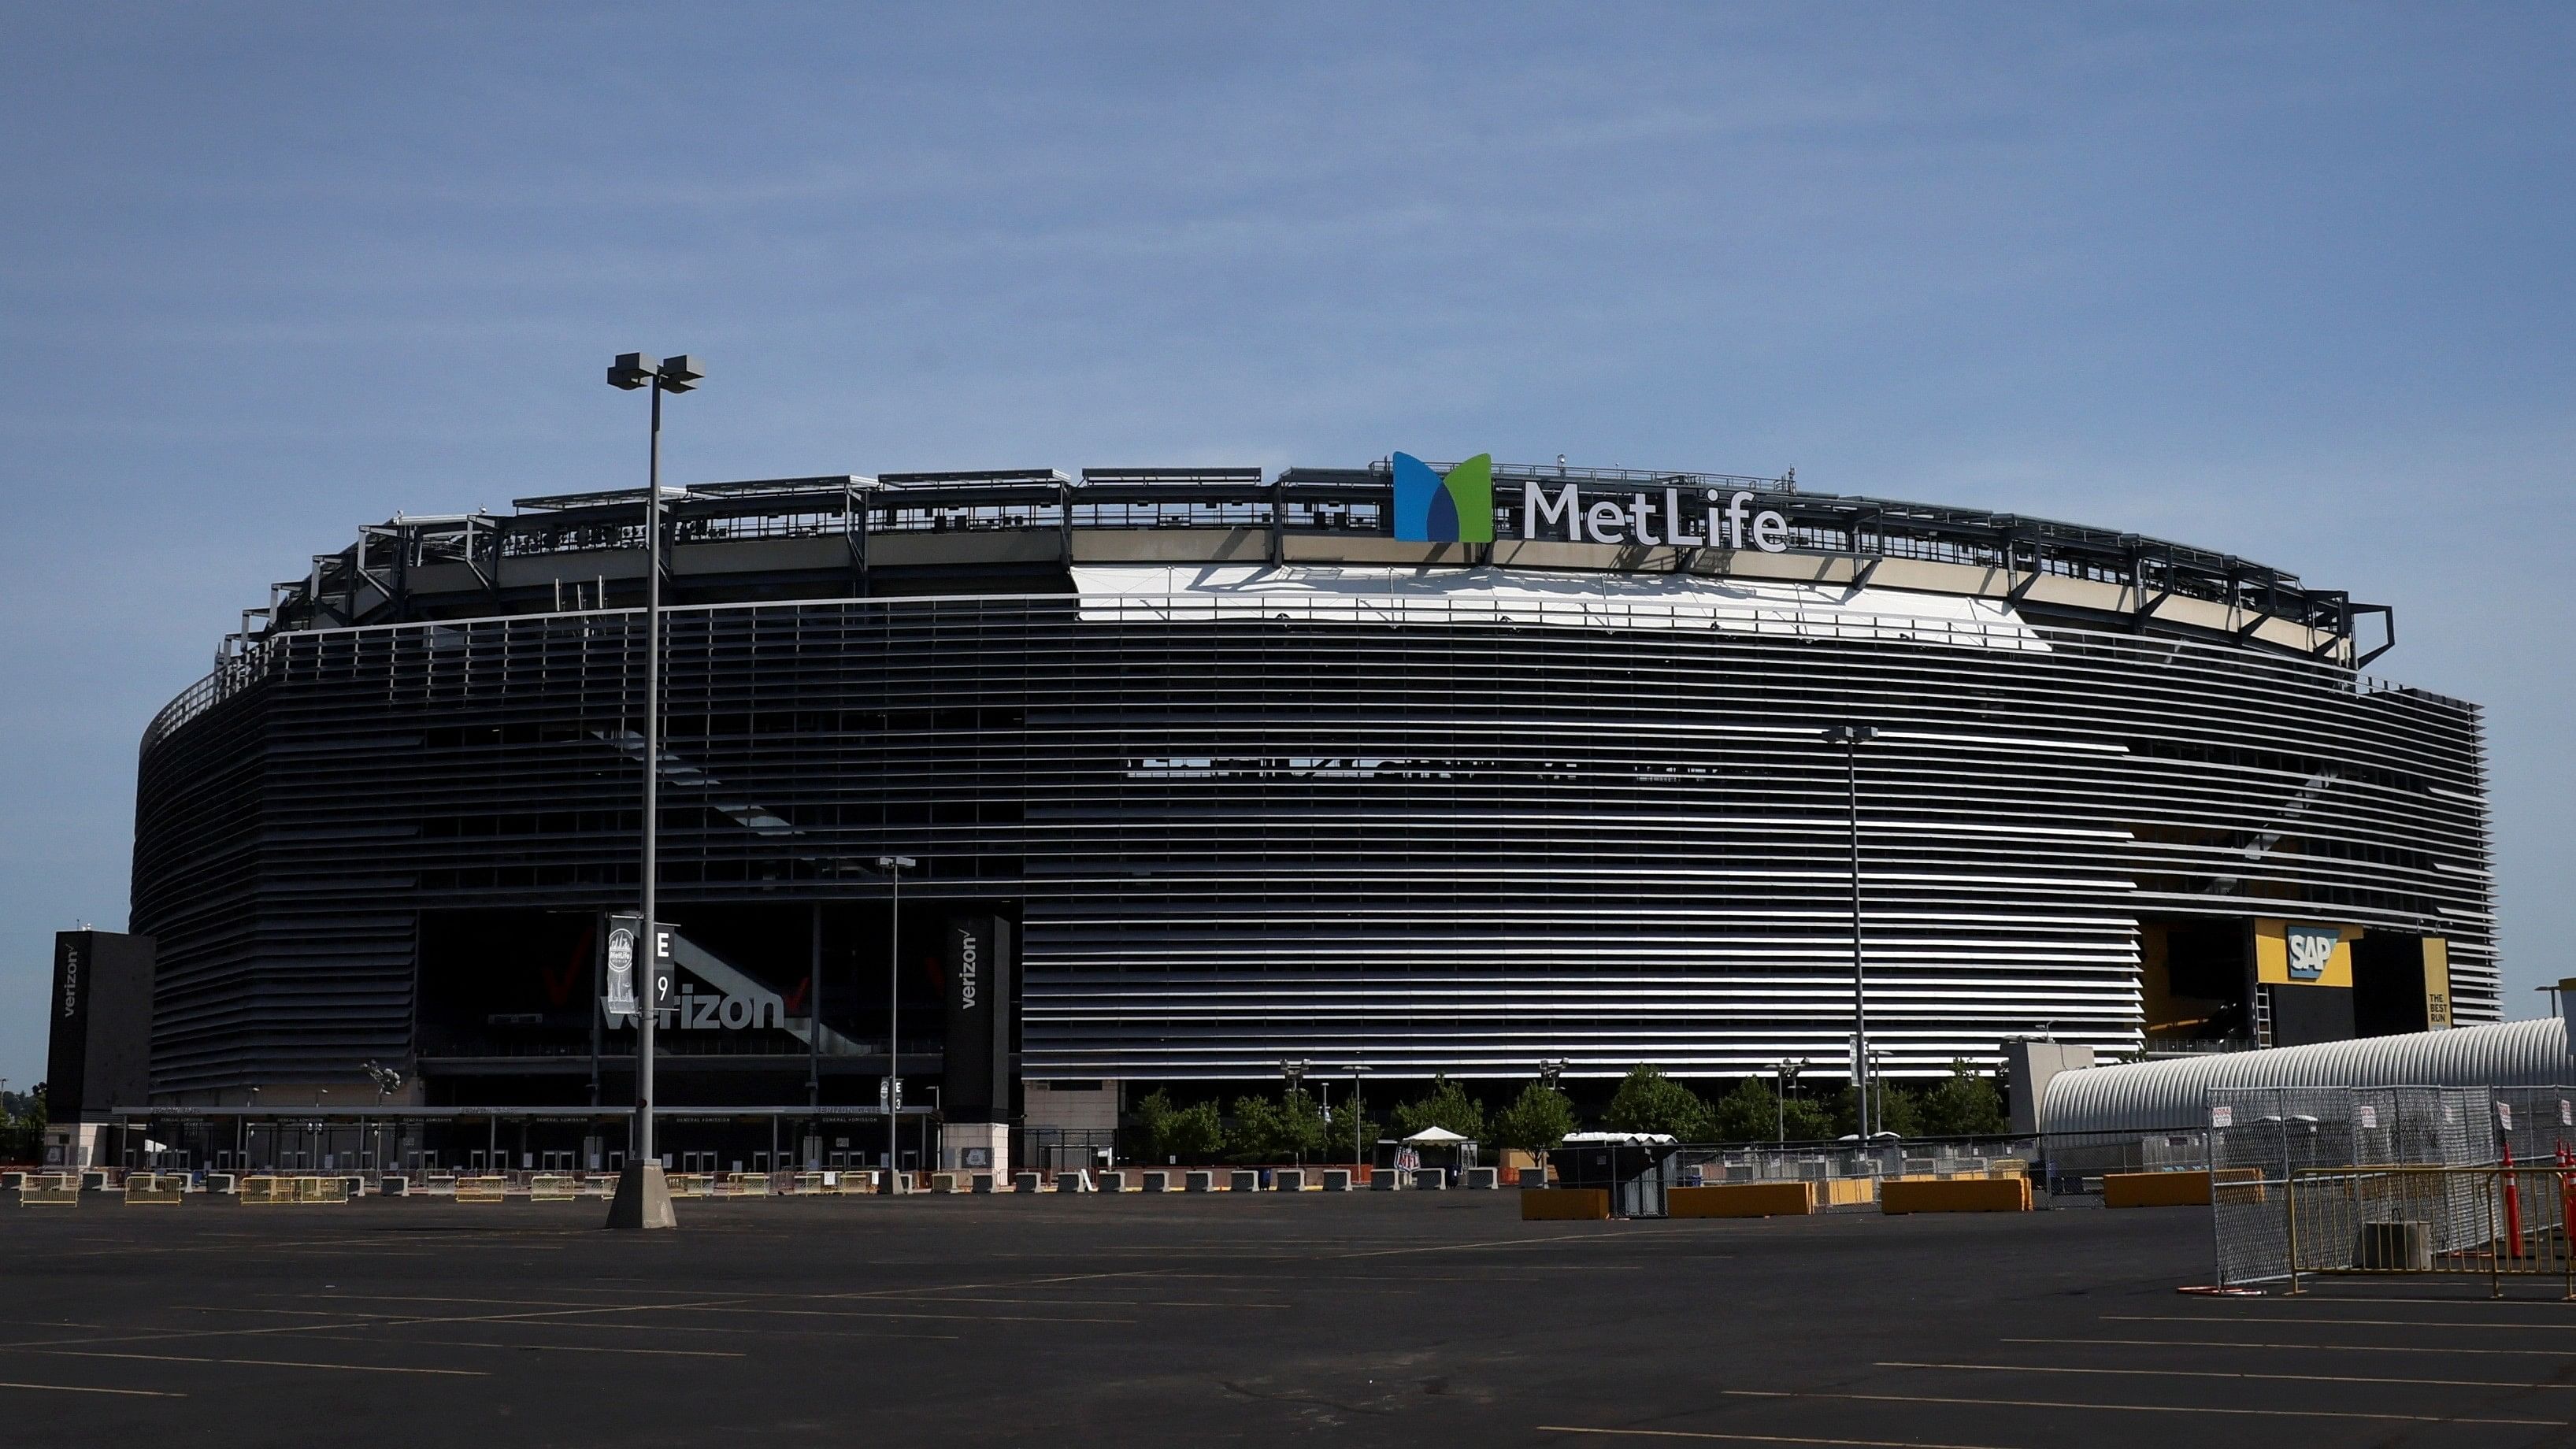 <div class="paragraphs"><p>File Photo: MetLife Stadium is pictured in East Rutherford, New Jersey. The MetLife Stadium is due to host the FIFA World Cup Final in 2026.</p></div>